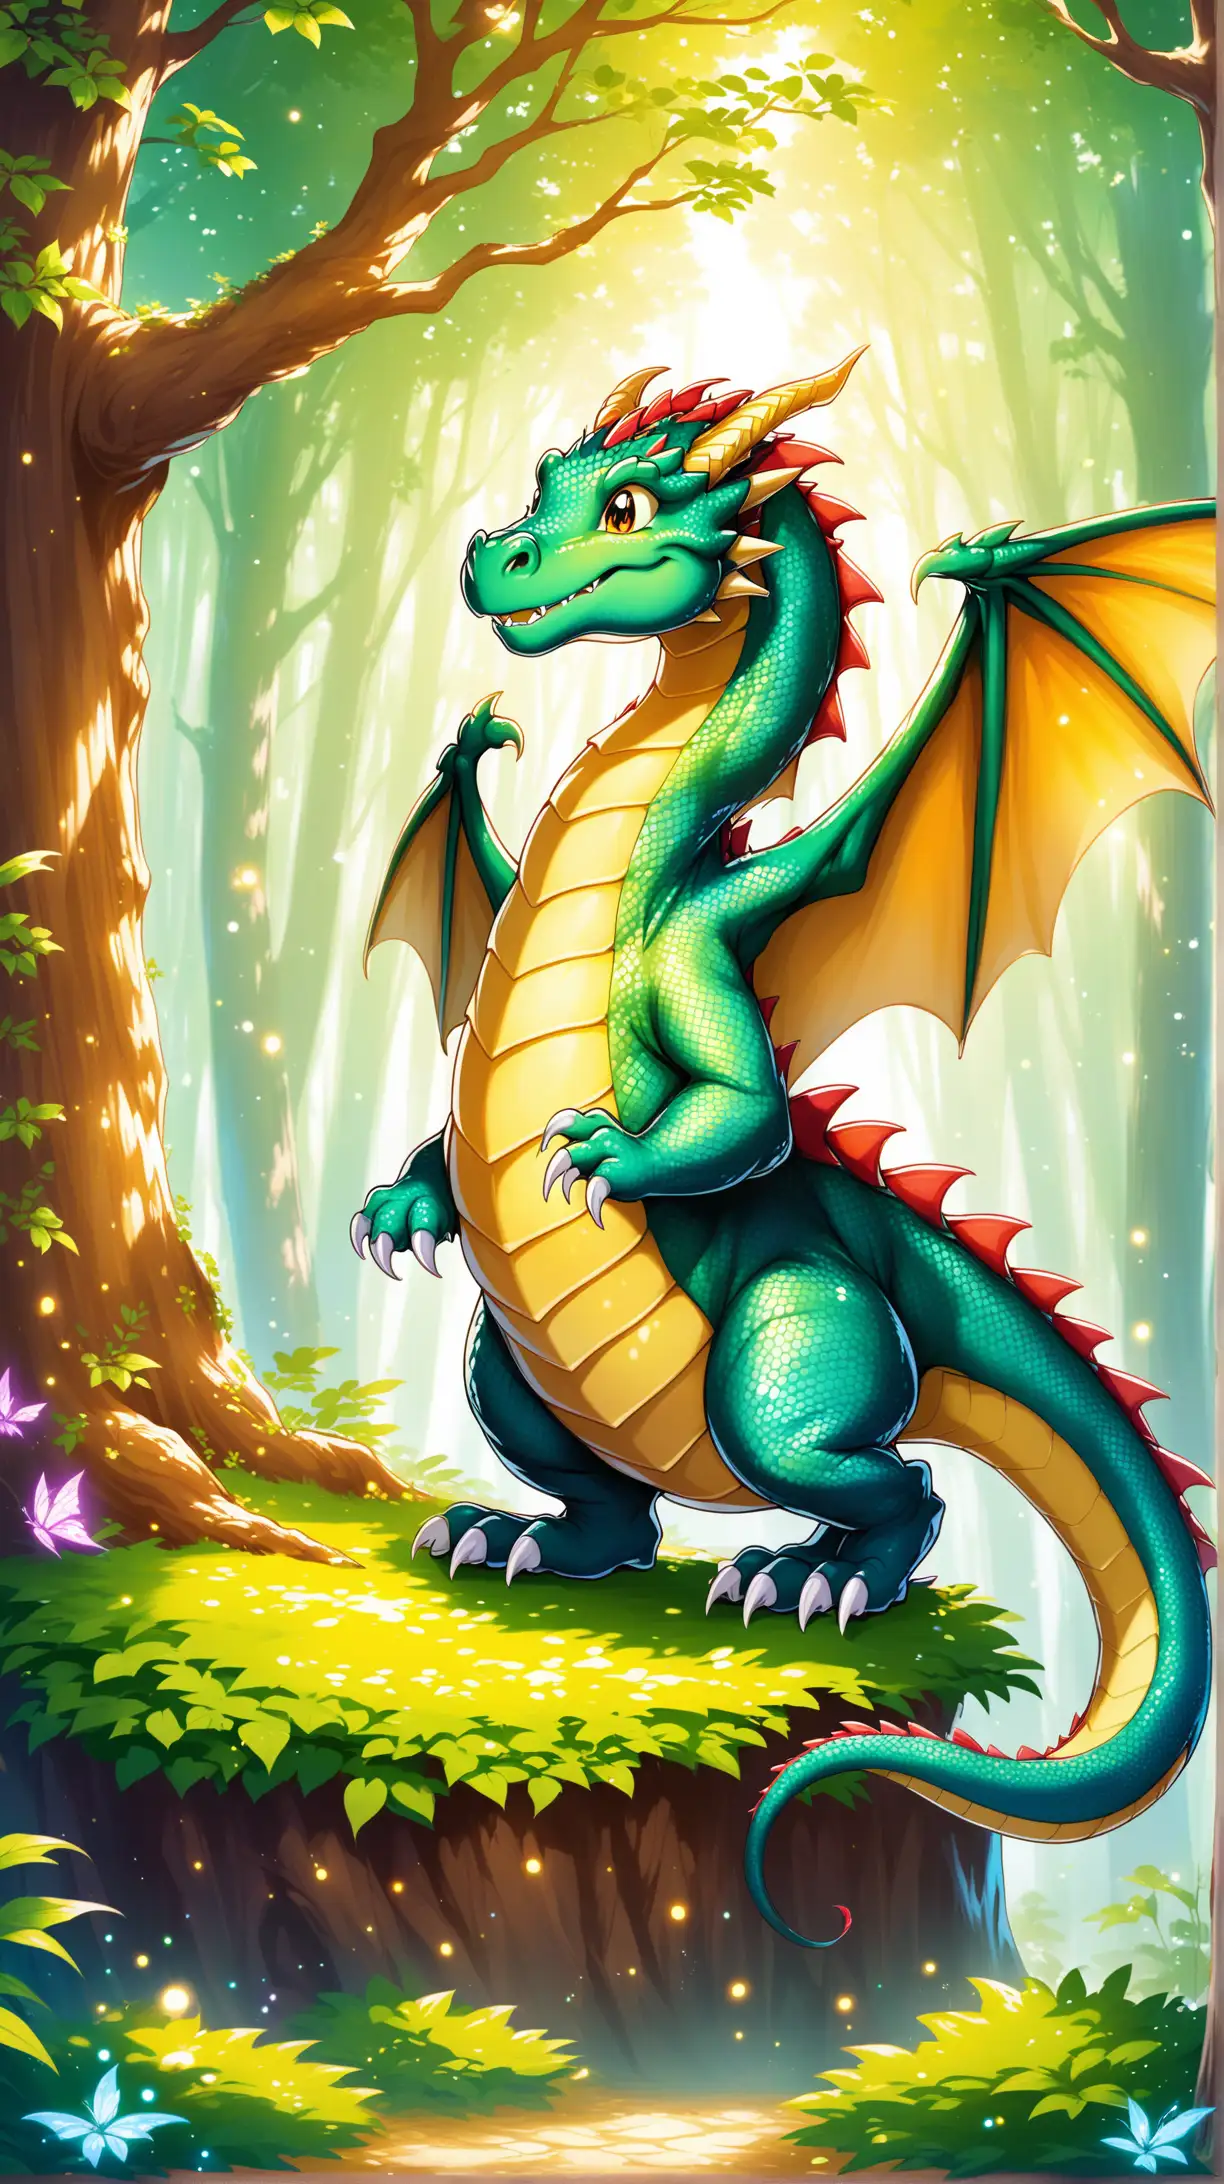 Enchanting Encounter Friendly Dragon in a Magical Forest